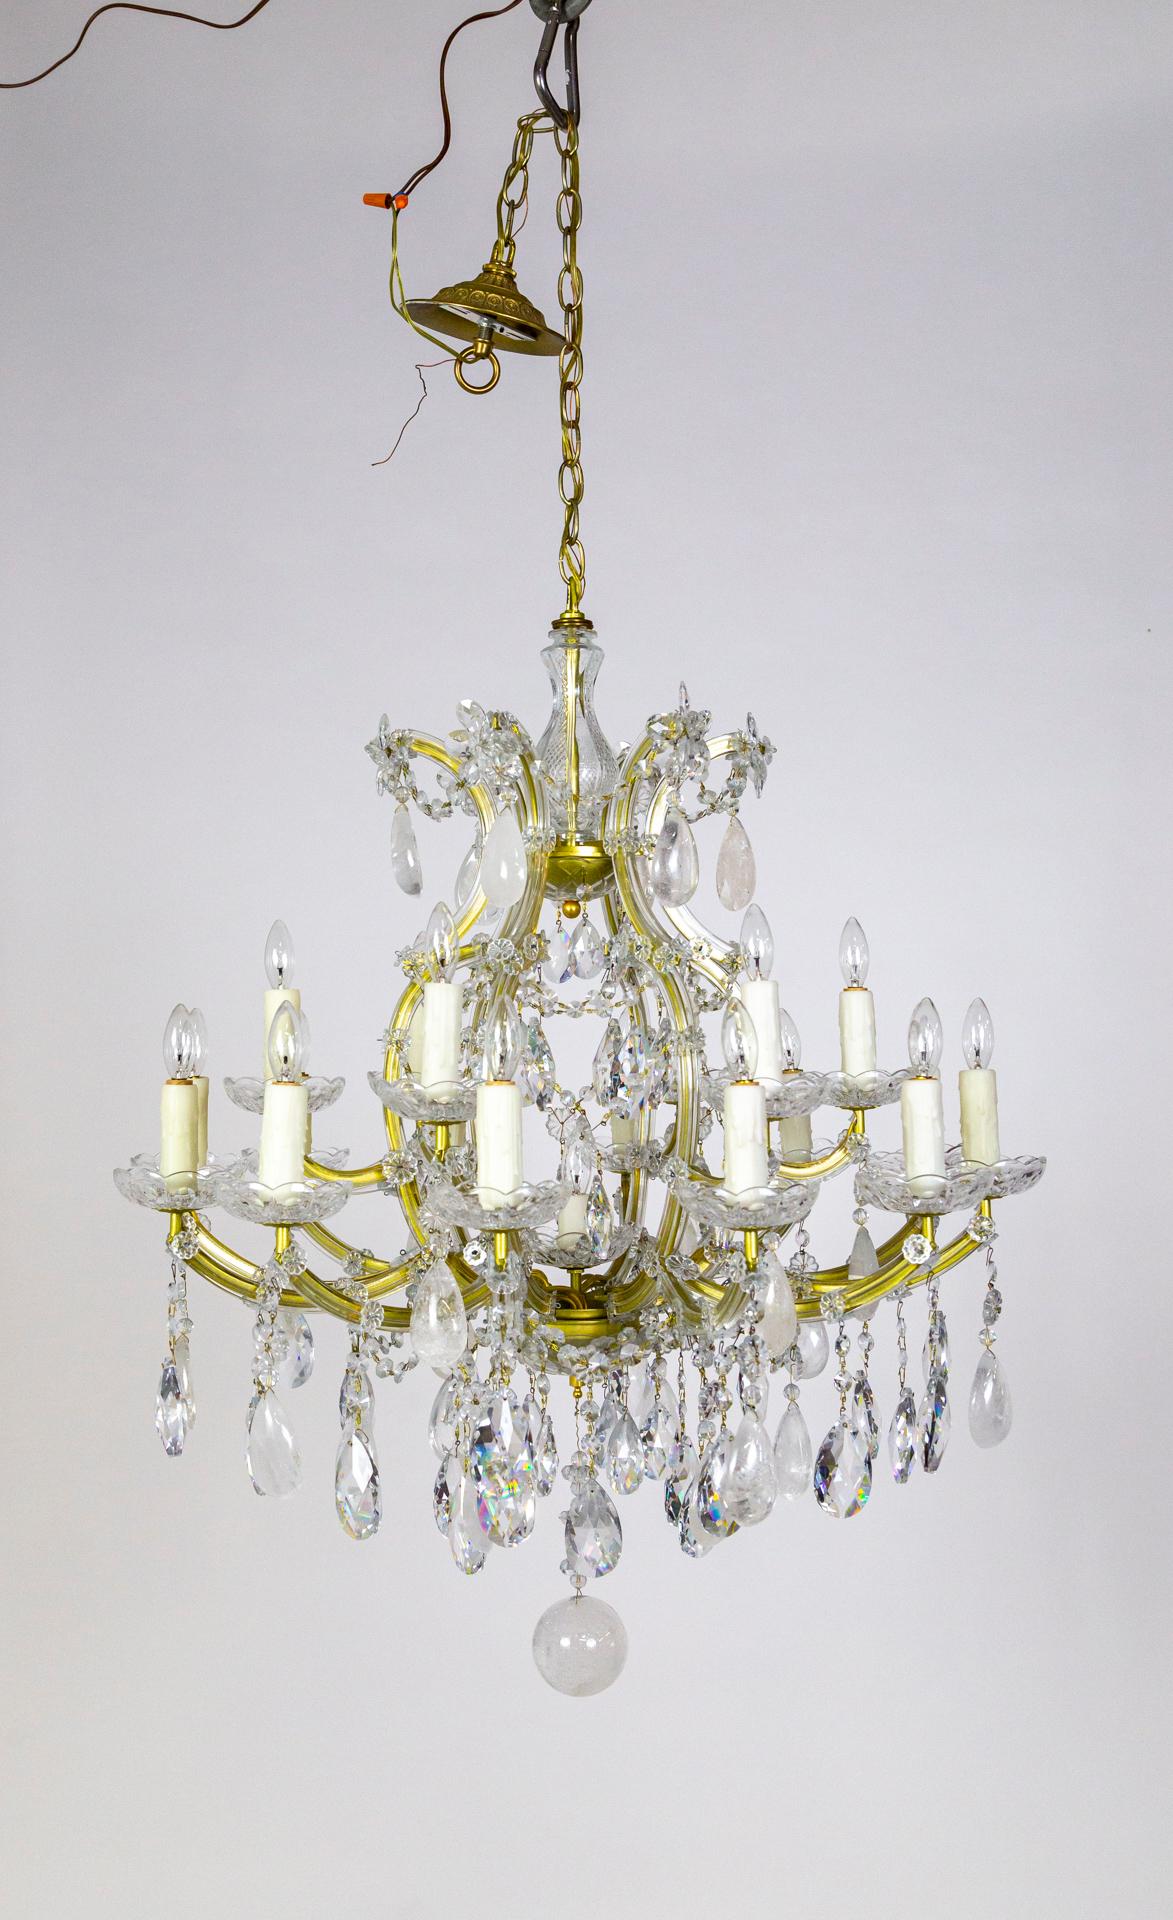 19-Light Rock Crystal Maria Theresa Chandelier For Sale 12